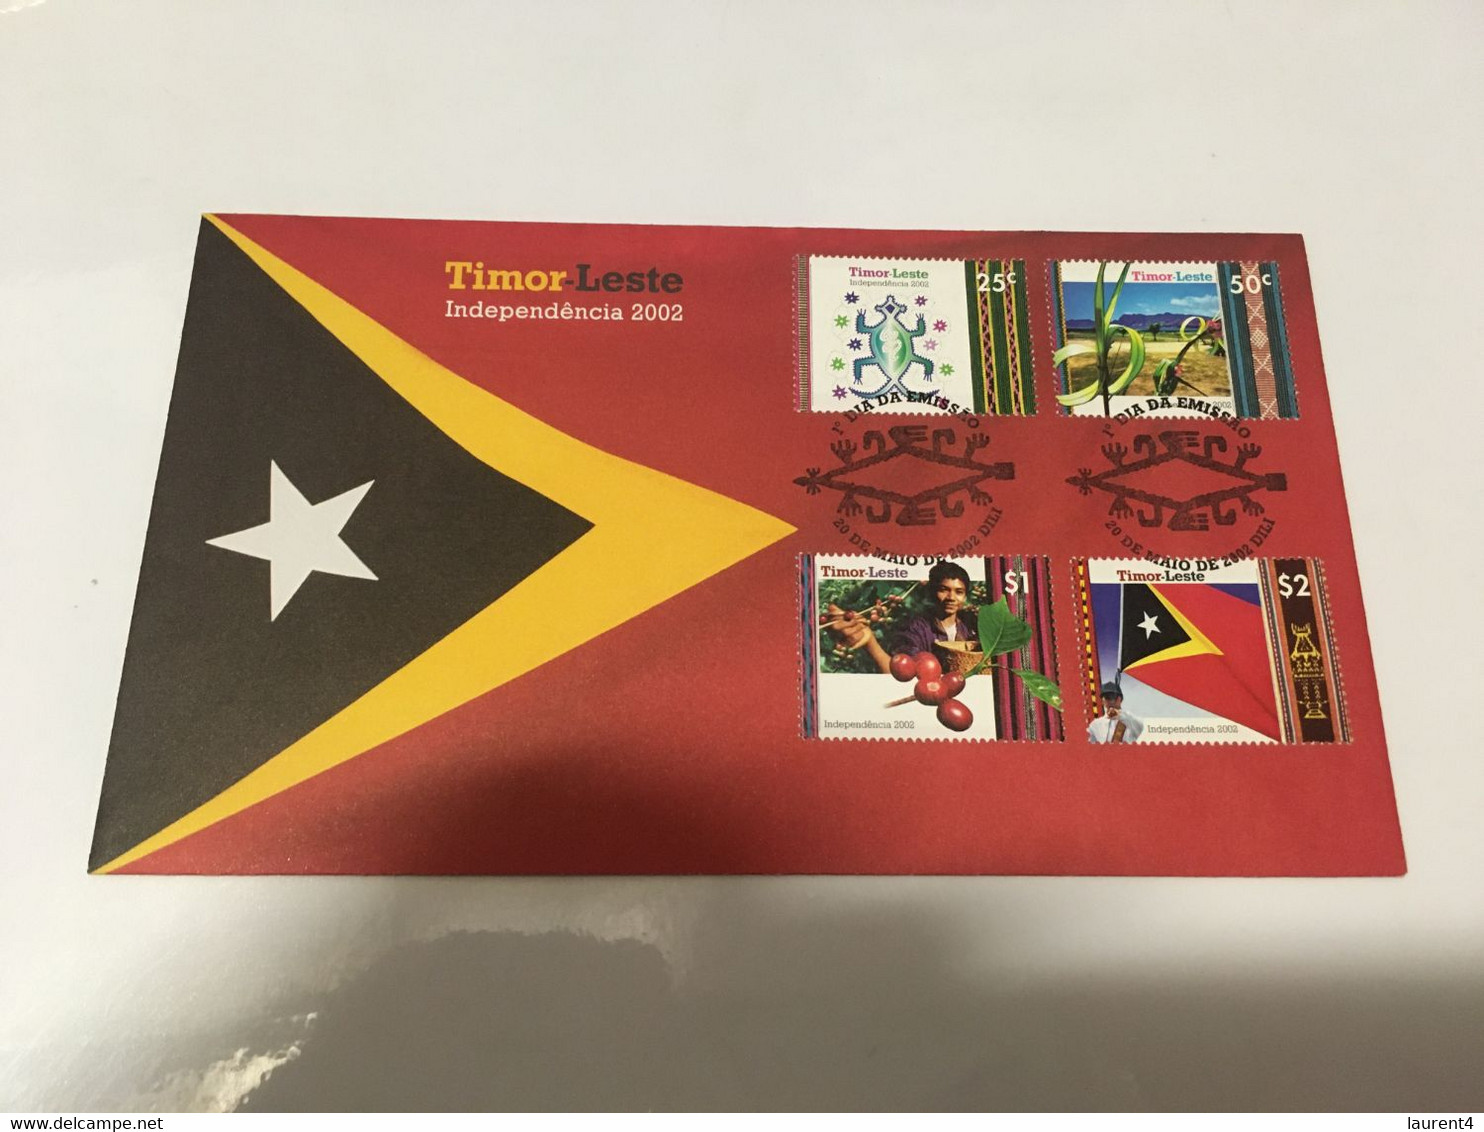 (1 G 48) Timr Leste Independence 2002 FDC (scarce) Cover - Issed By Australia Post - Osttimor